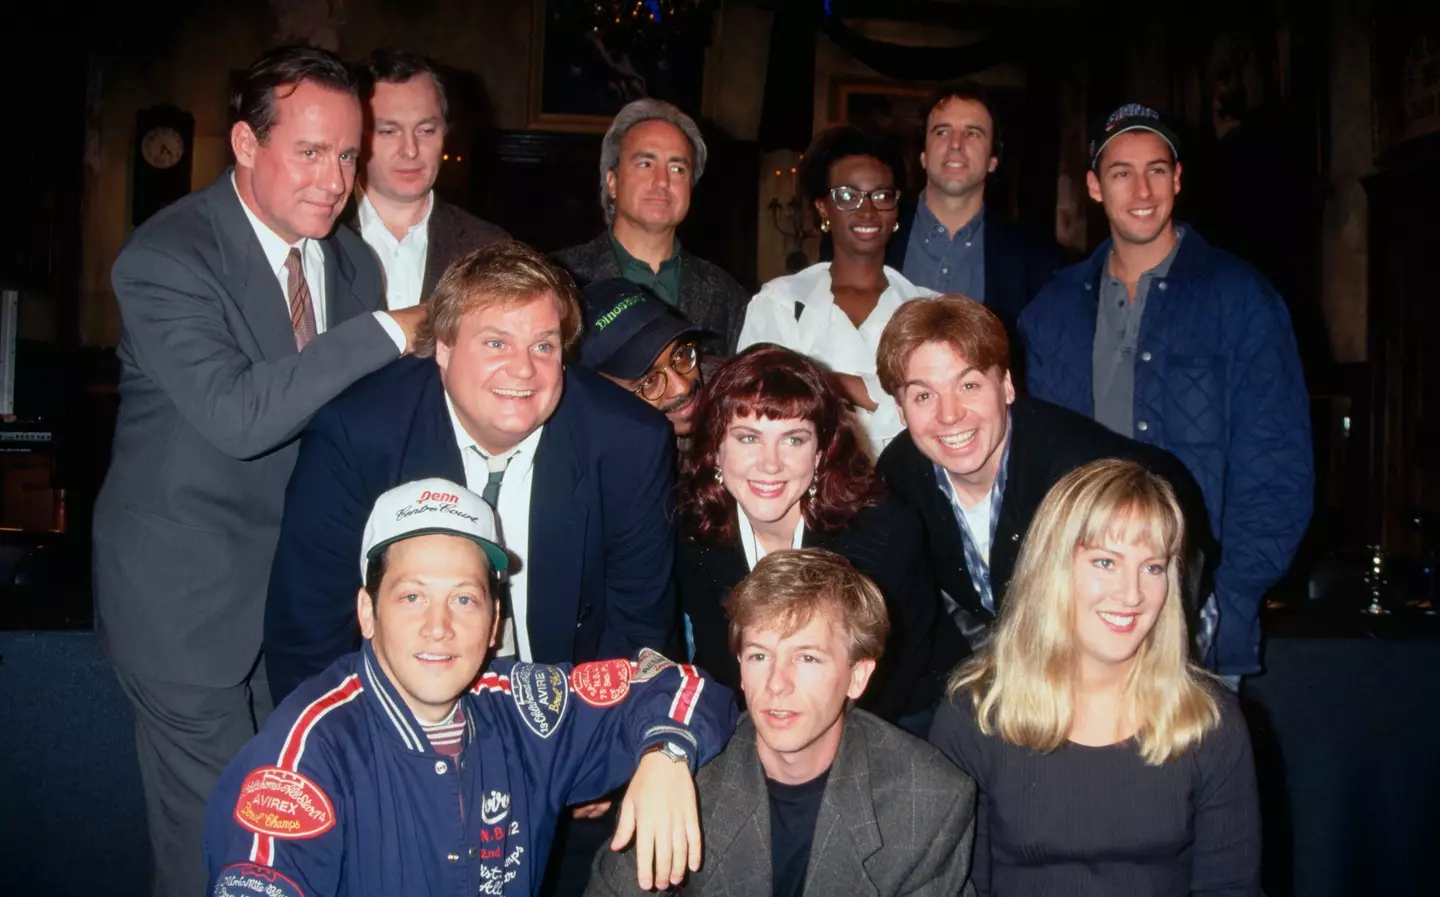 The two actors starred together on SNL in the 90s.